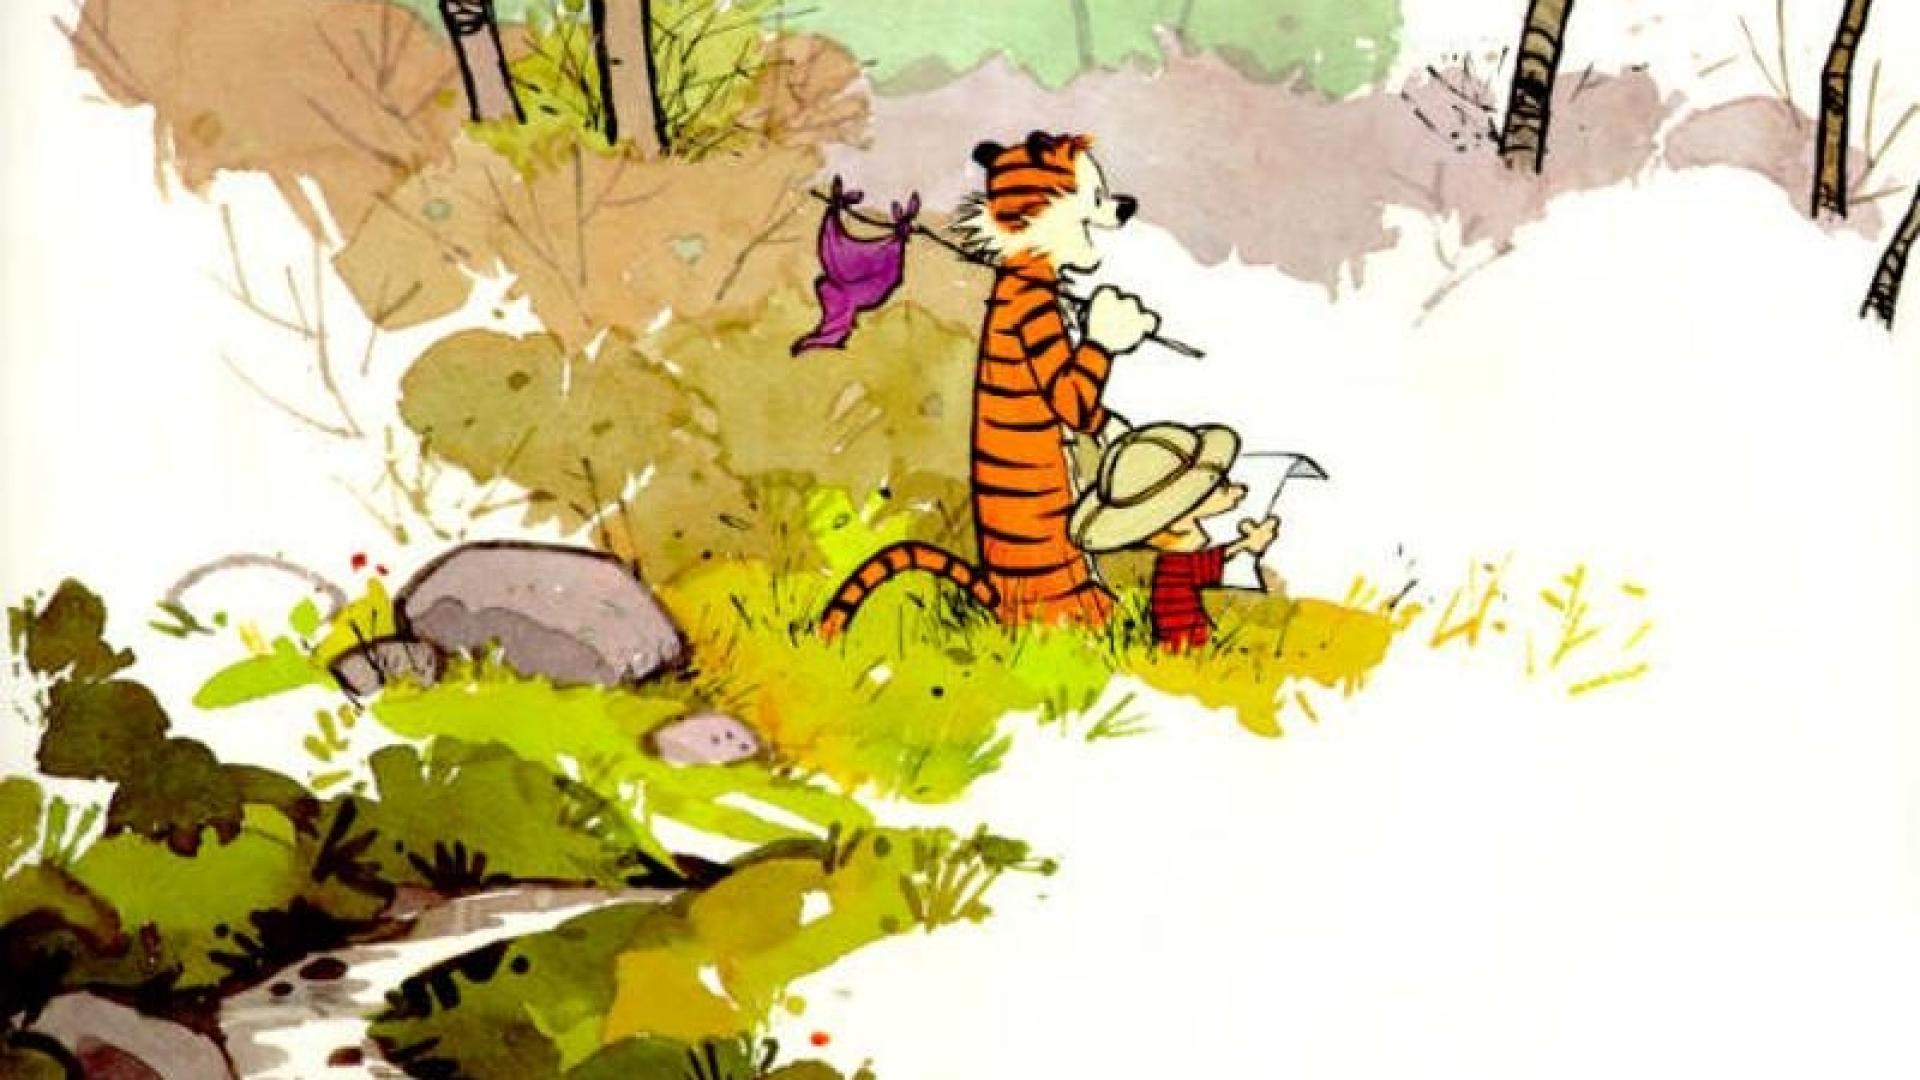 Calvin and hobbes wallpaper - (#174227) - High Quality and ...